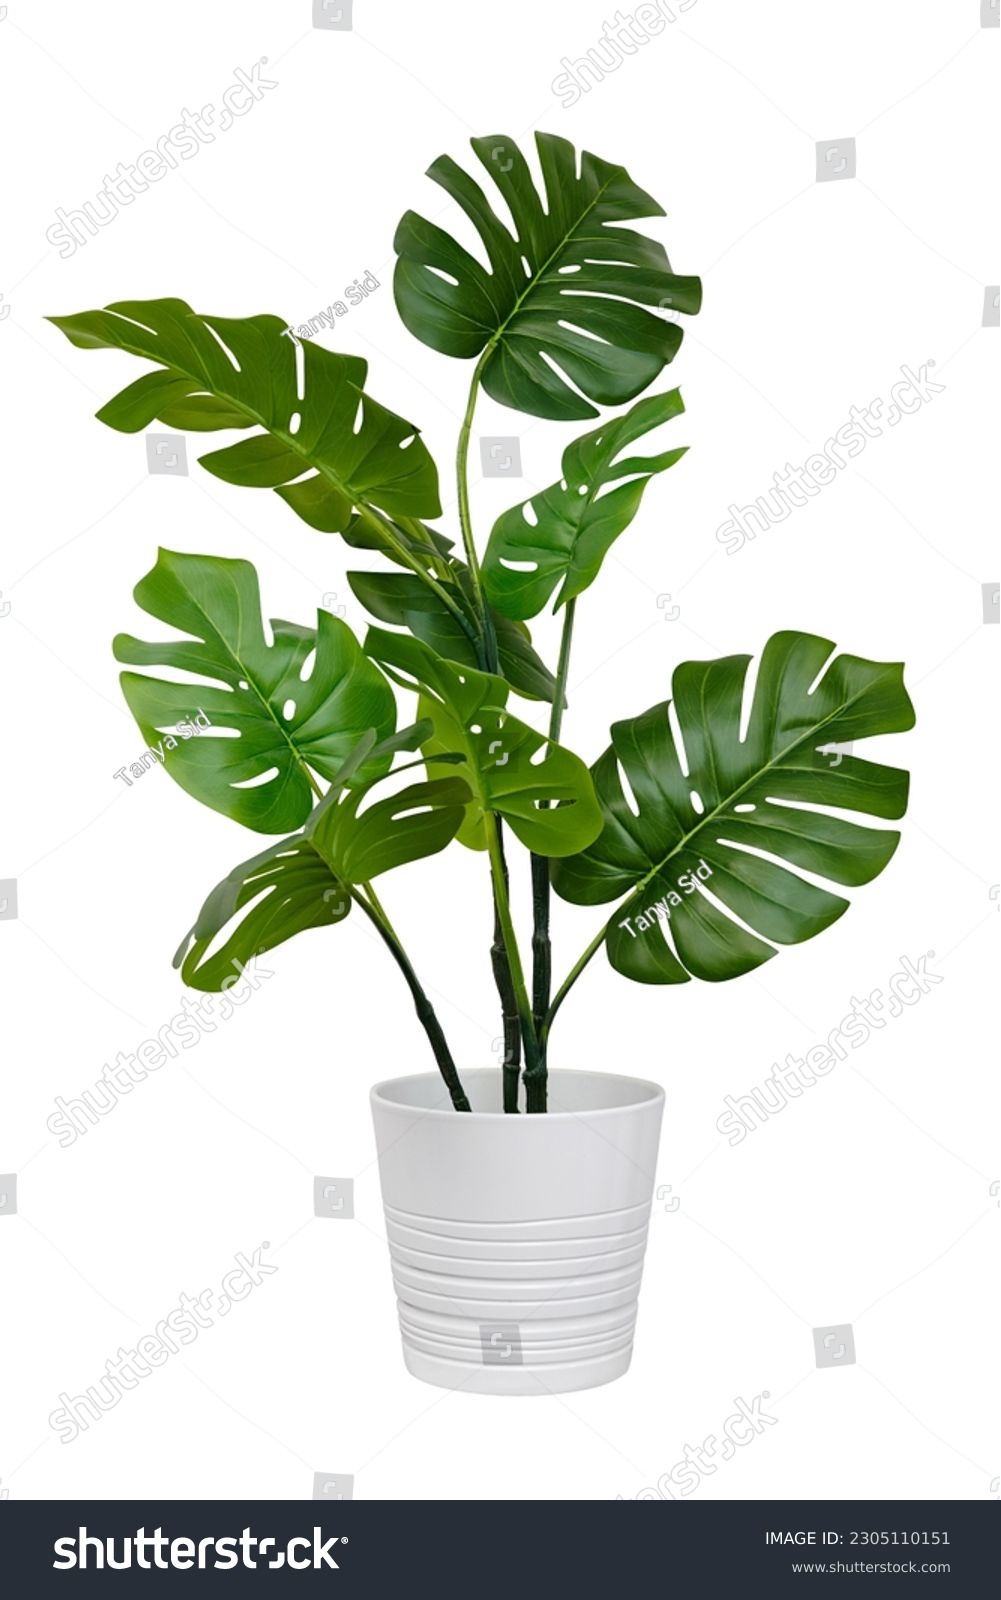 Monstera in a pot isolated. Monstera bush on a white background.